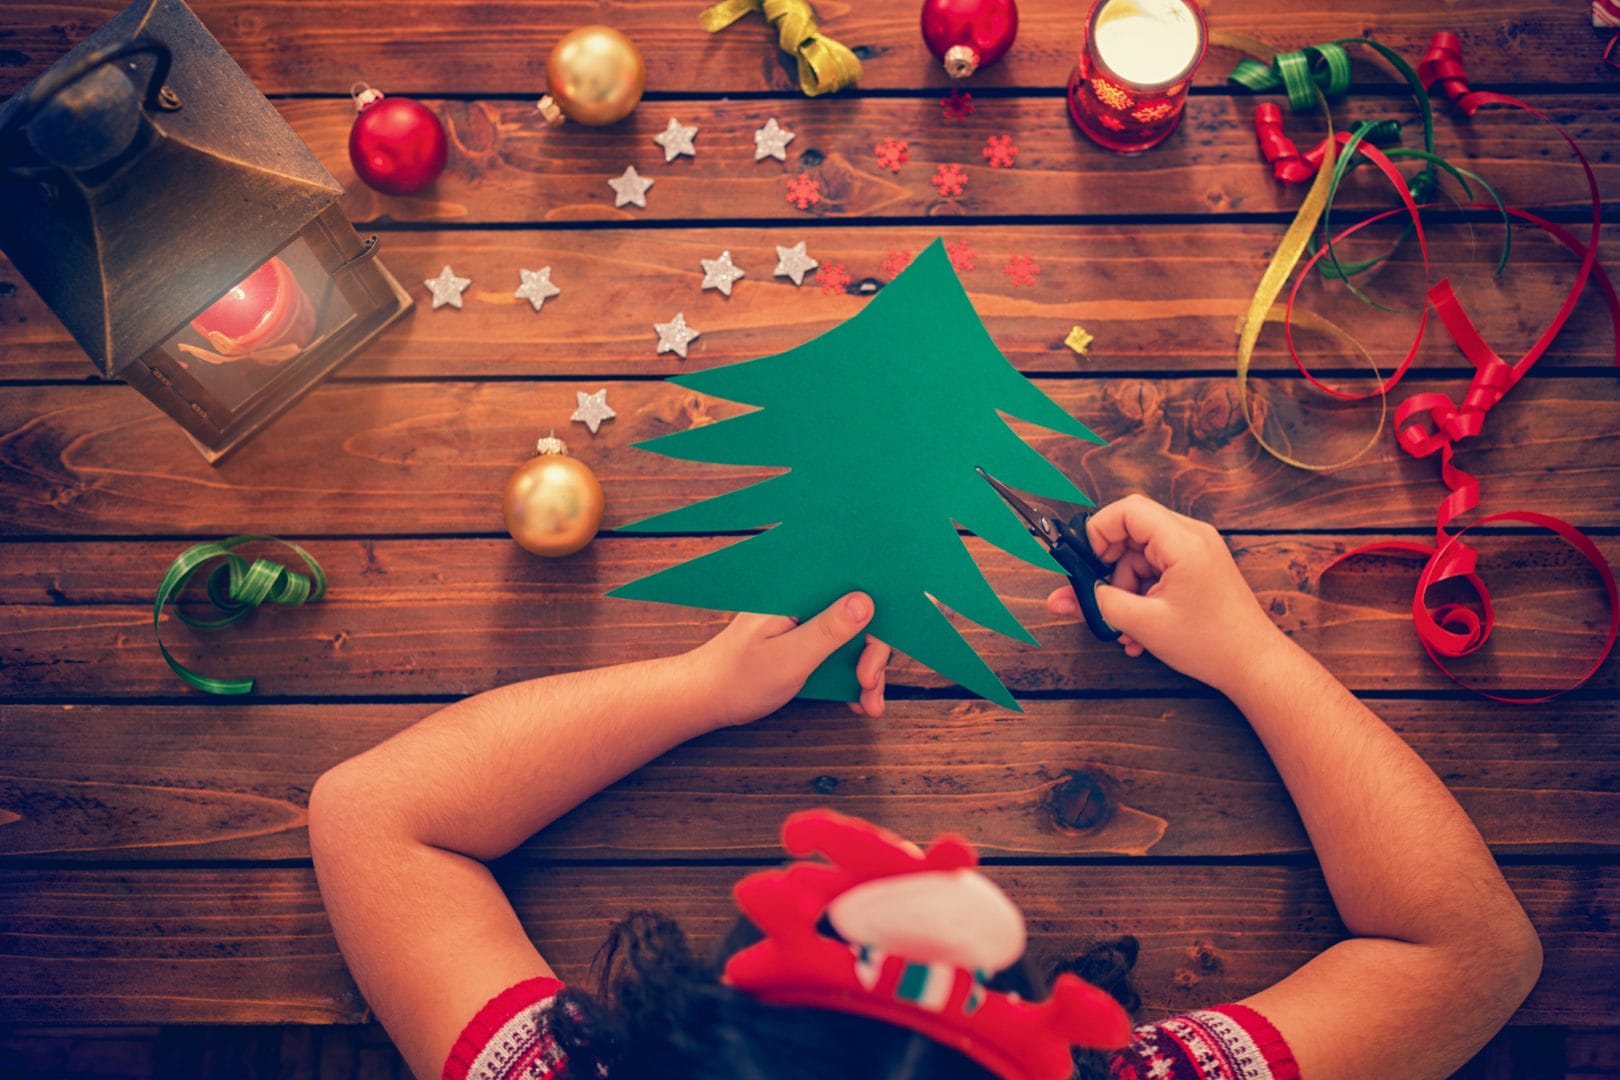 Fun and festive holiday crafts for kids